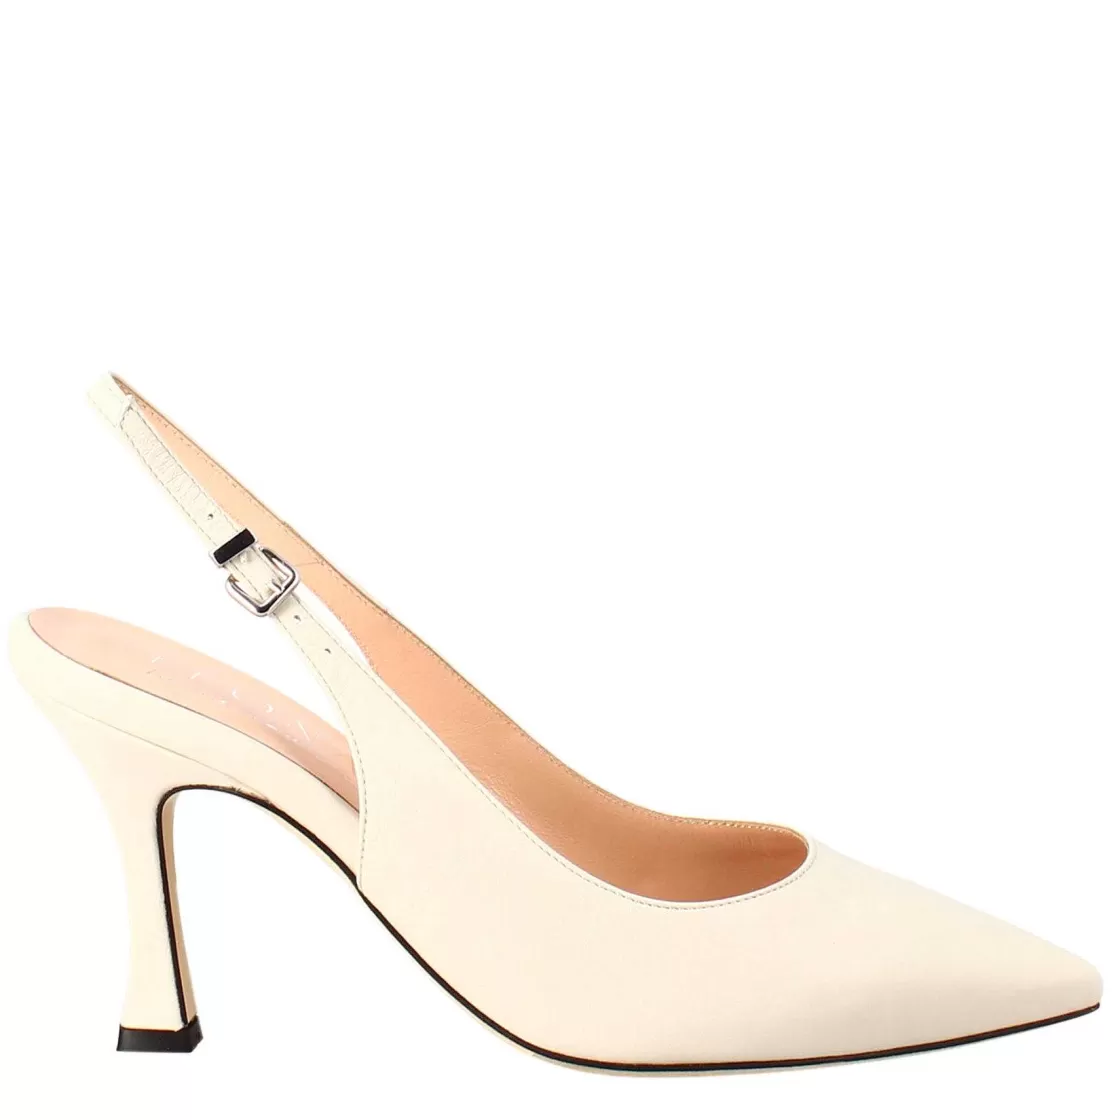 Leonardo Decollete With High Heels For Women In Cream Colored Leather Hot